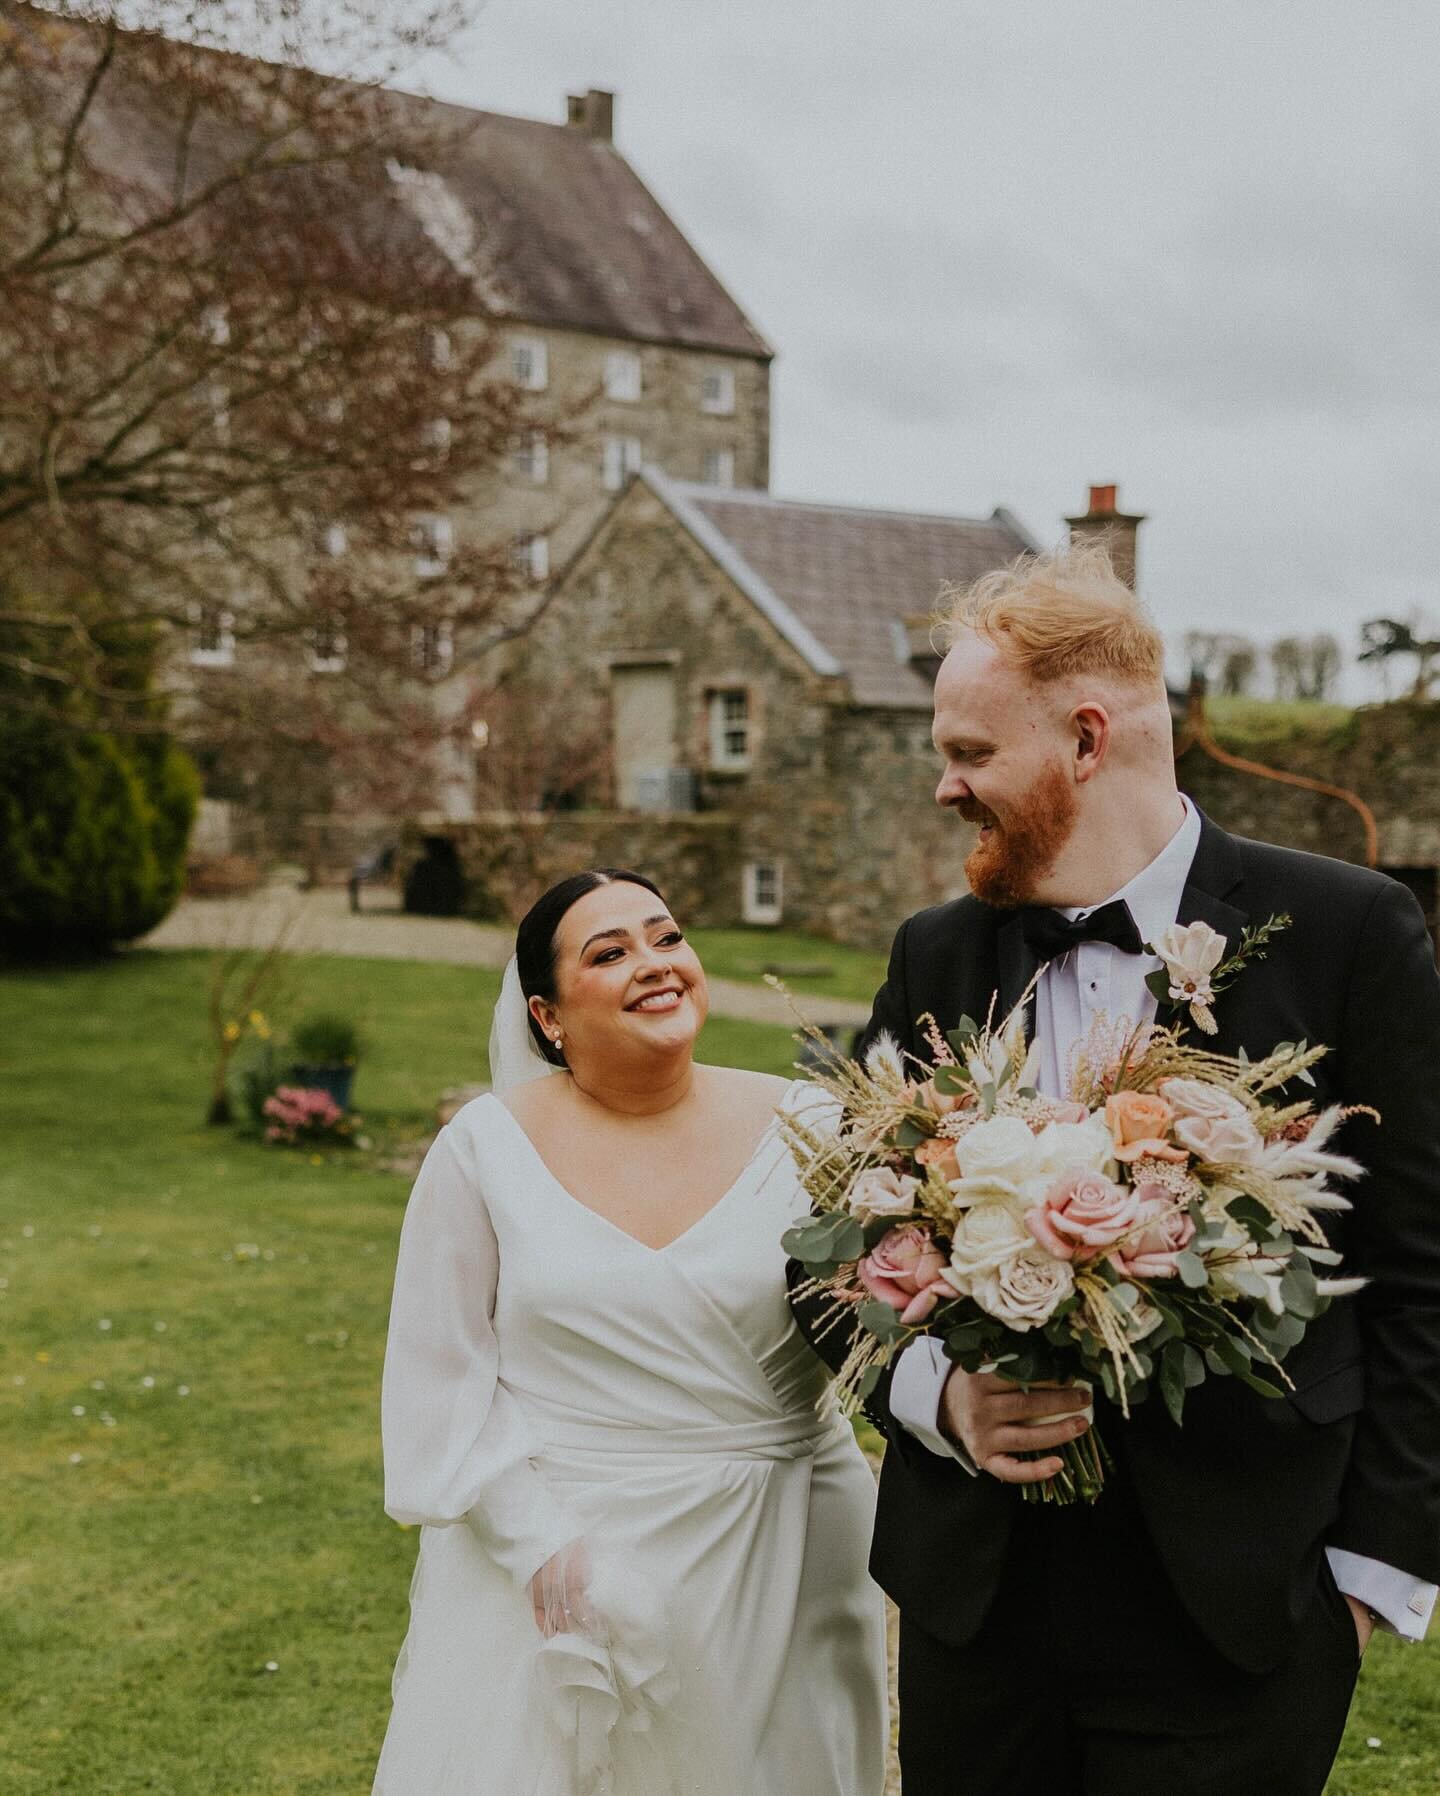 Charlotte &amp; Adam - the best days craic from Thursdays wedding @themillatballydugan. Right from we walked into bridal prep we knew we were in for a great day. Charlotte &amp; Adam thank you both so much for having us capture your special day! Much